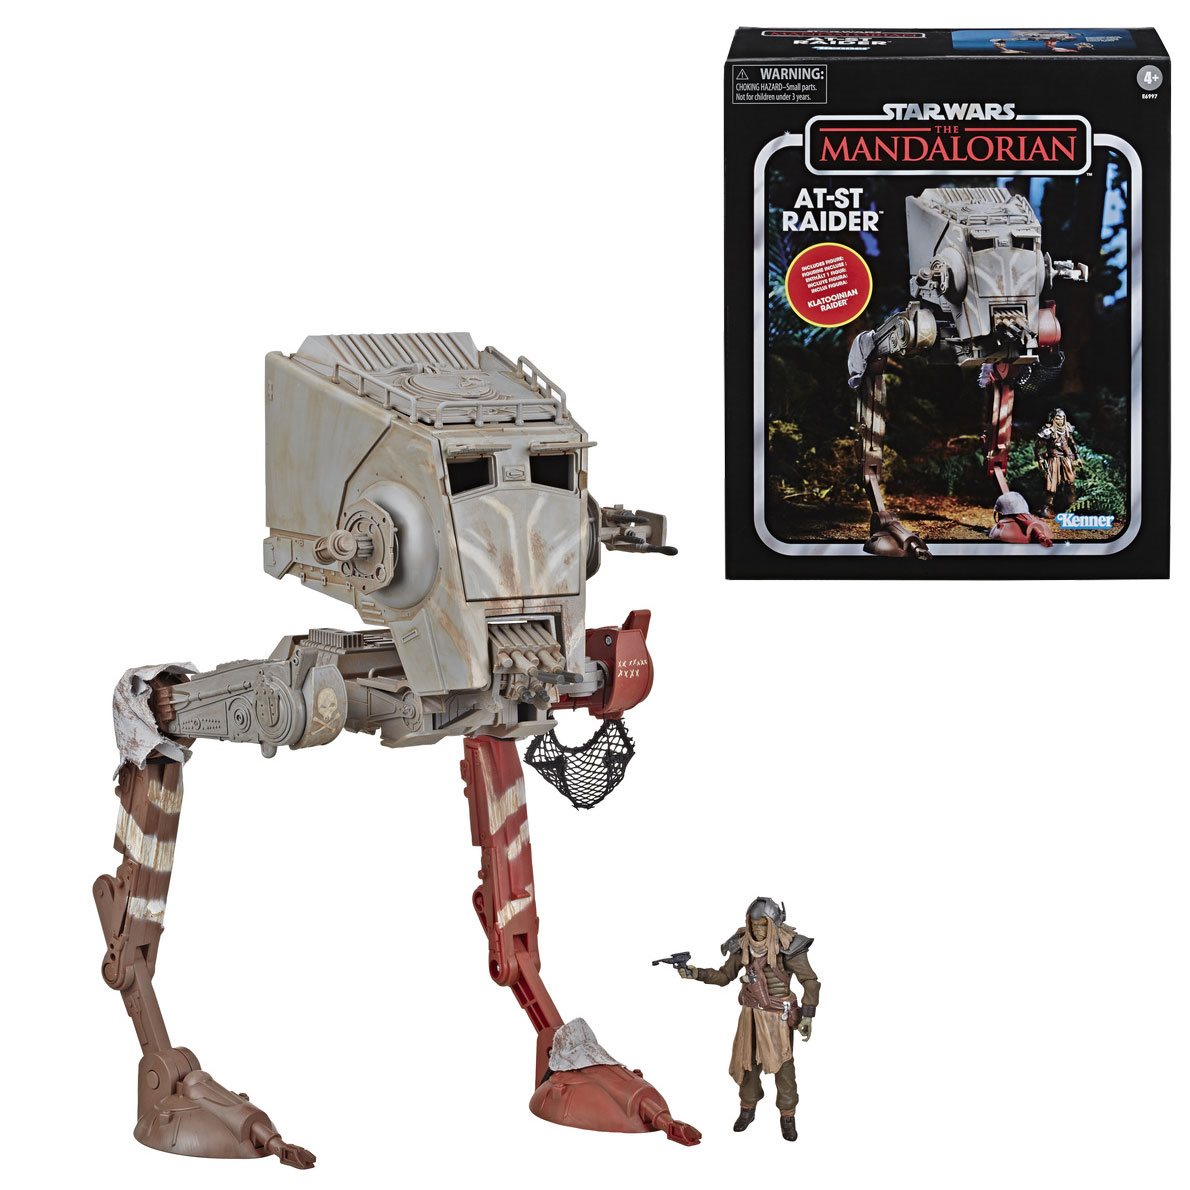 Star Wars The Vintage Collection The Mandalorian AT-ST Raider Vehicle with Klatooinian Raider HSE6997 630509870653